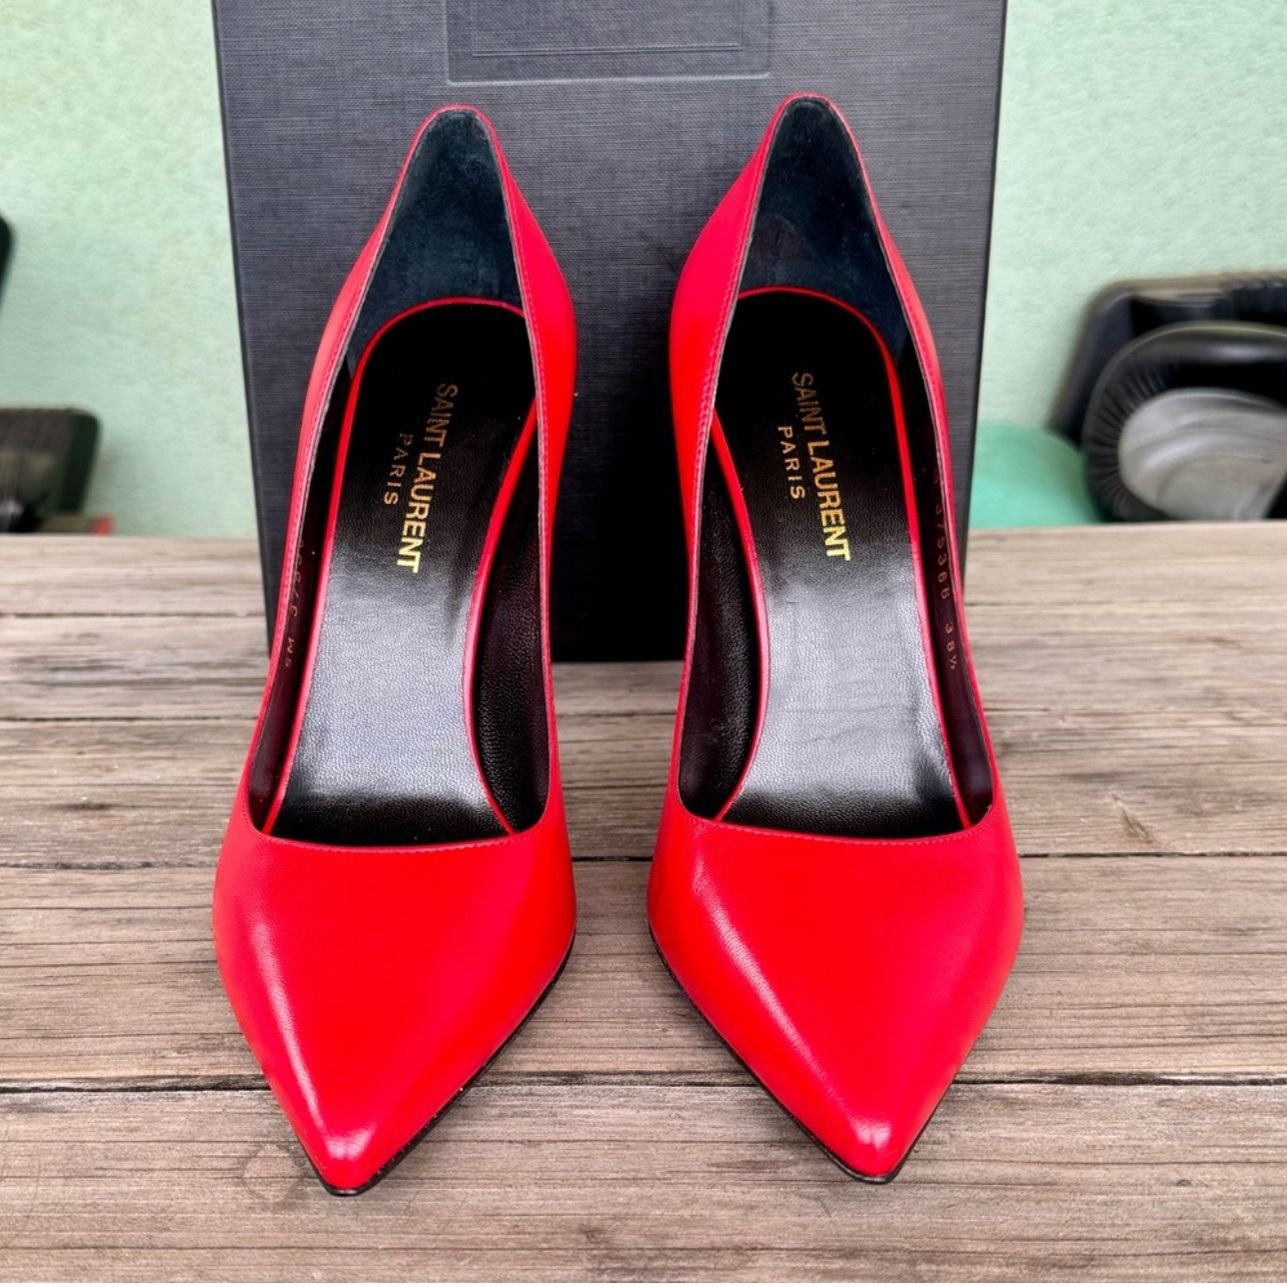 Brand New! SAINT LAURENT Classic Paris SK 105 Leather Pointed Toe Red Pumps 